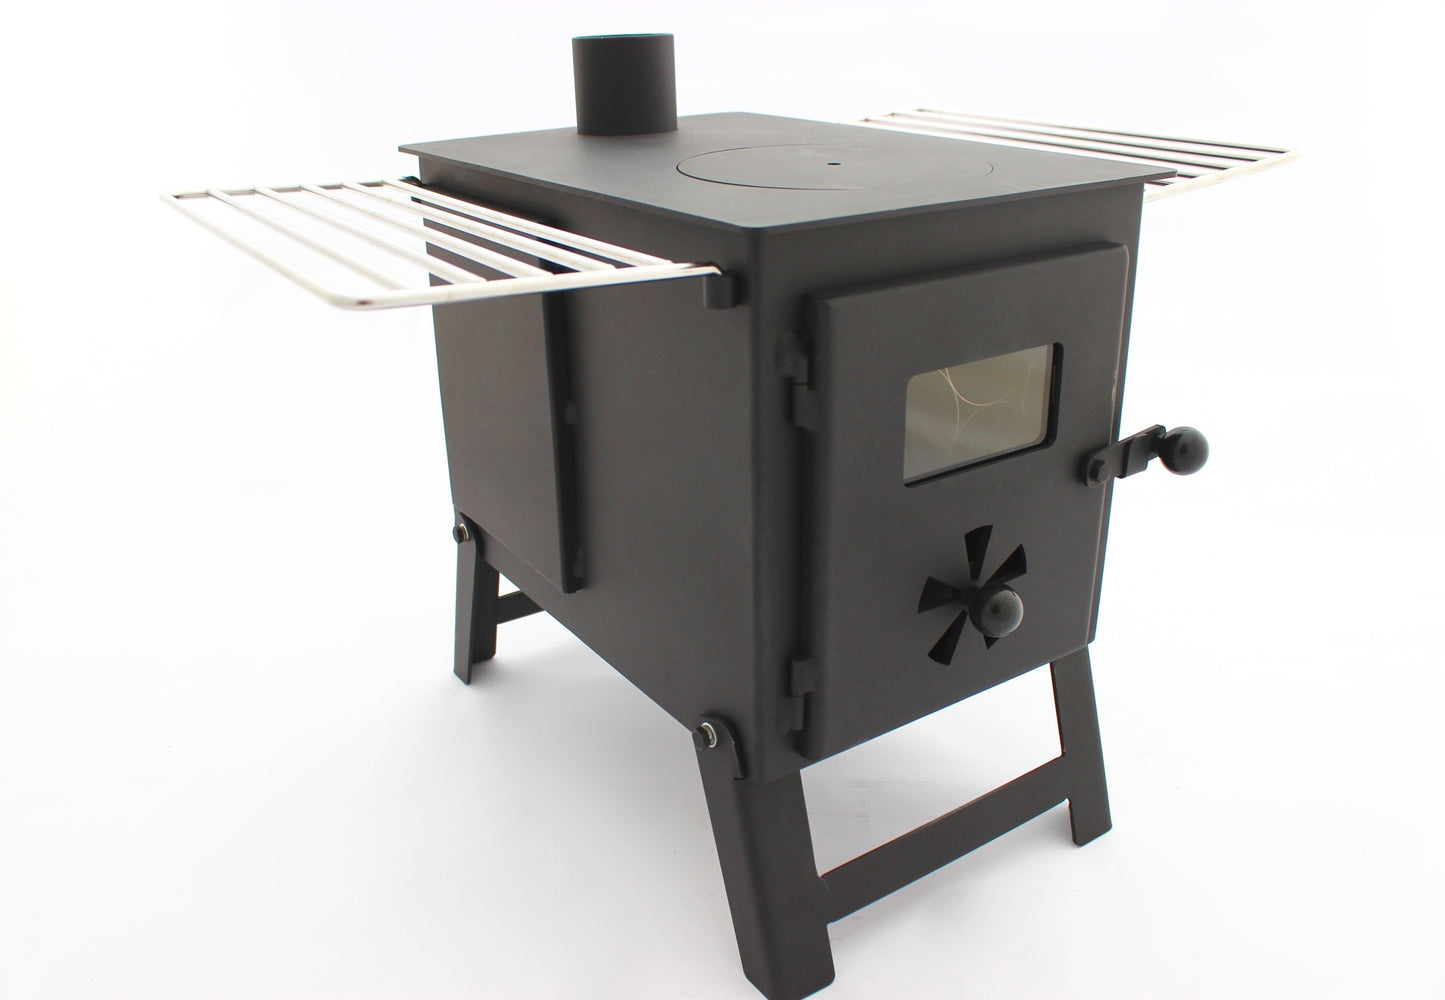 Nomad PRO | Tent Stove with Eco-Burn